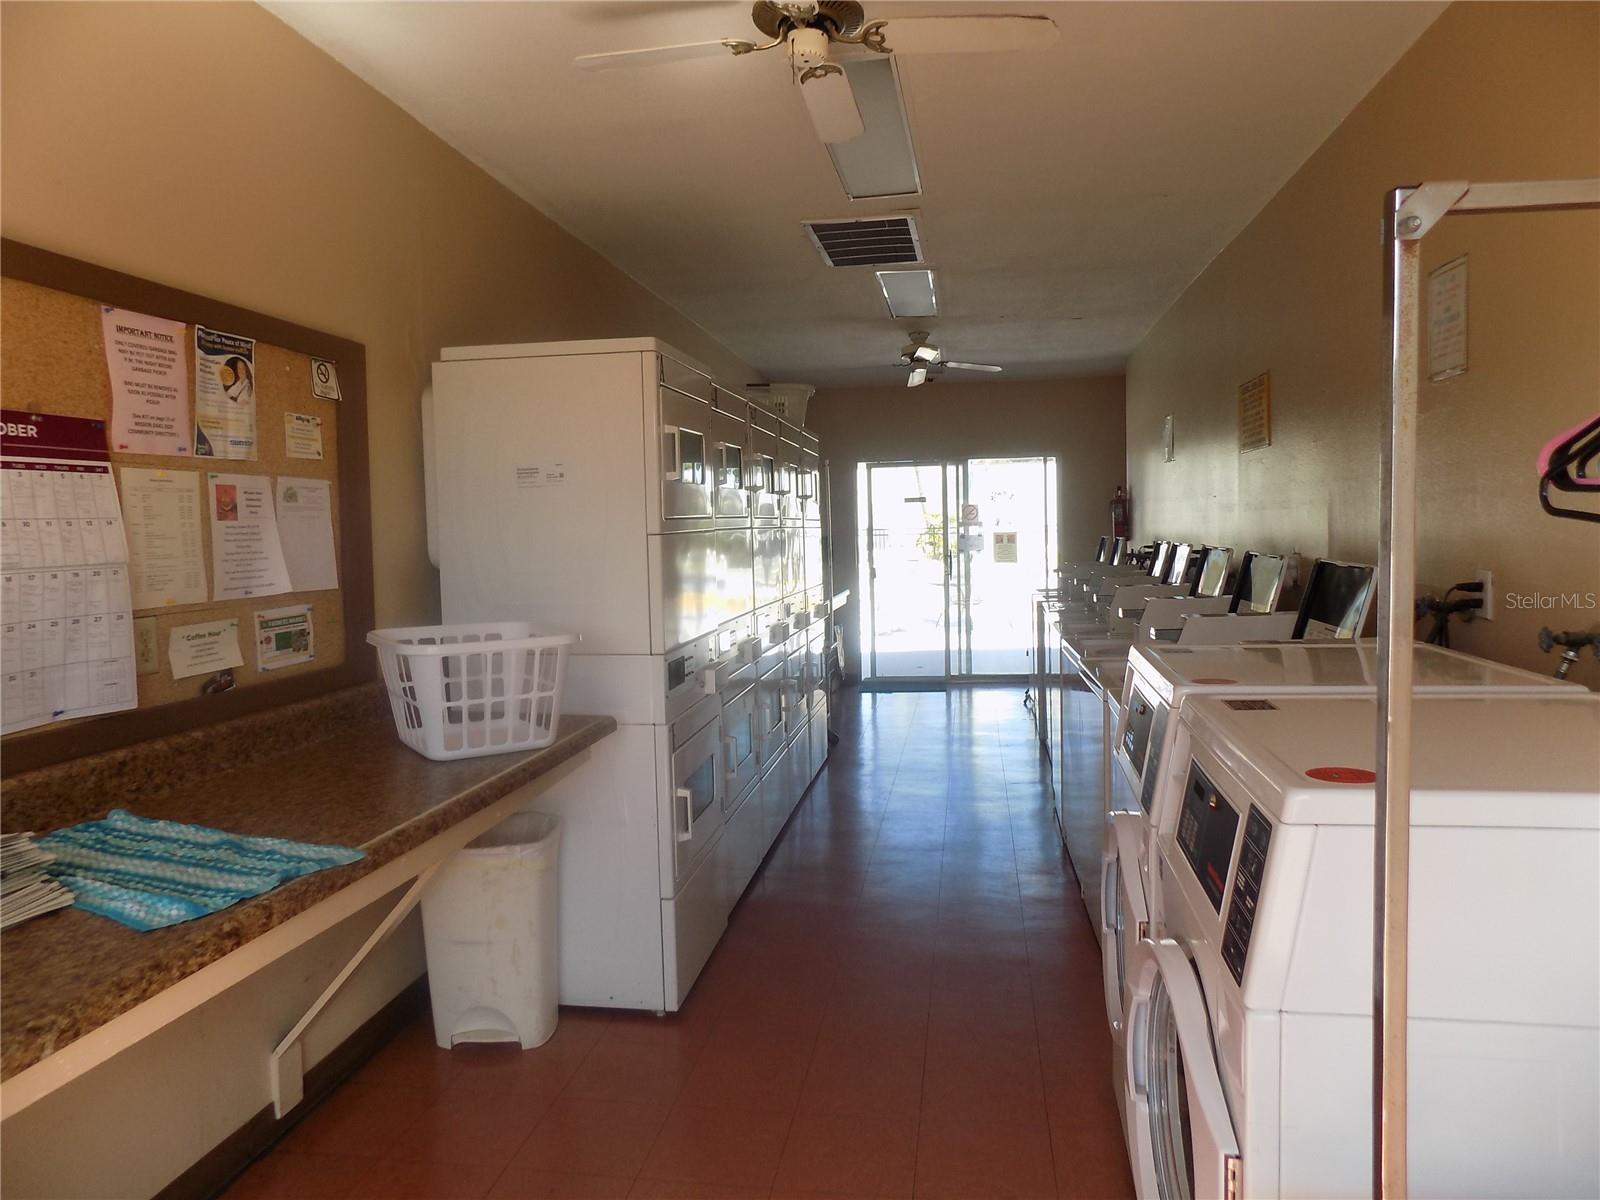 Complex Laundry Room off Clubhouse & Pool area.